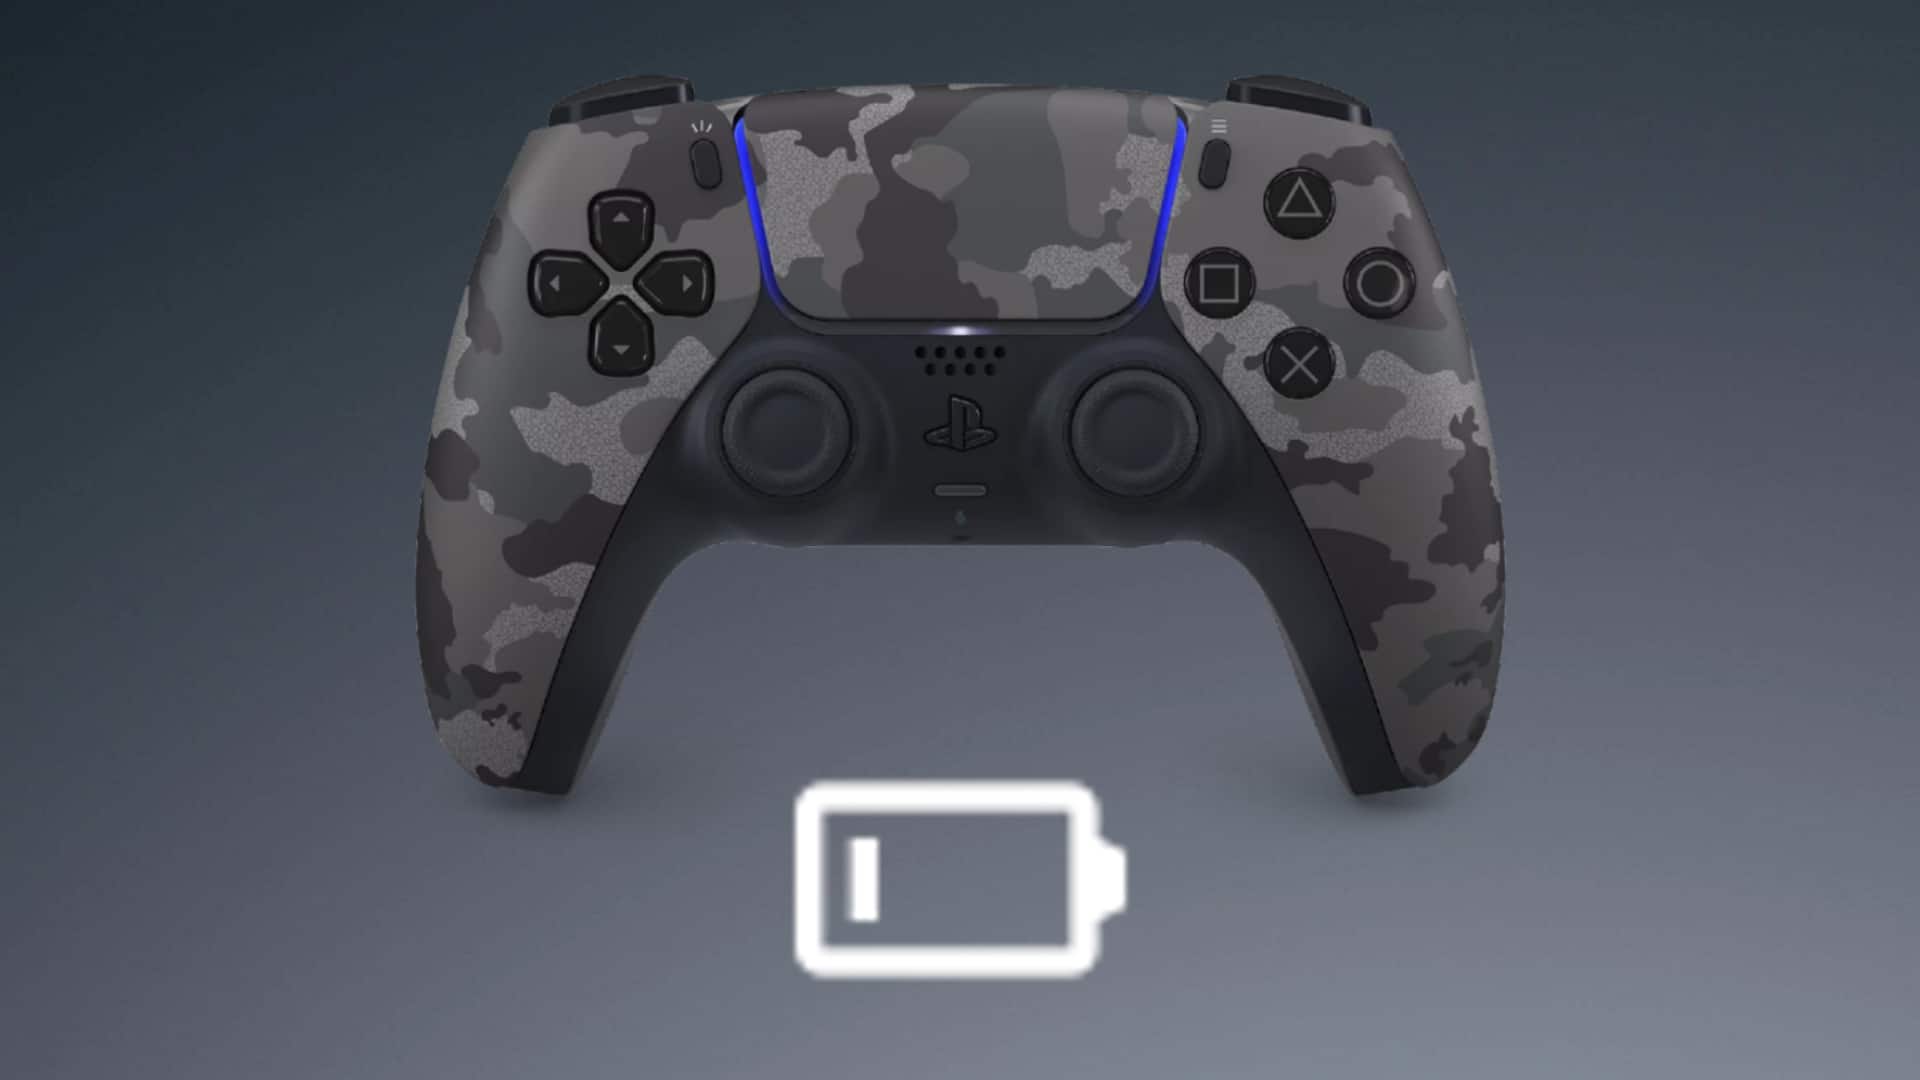 Why do PS5 controllers die so quickly featured image showing controller and low battery symbol